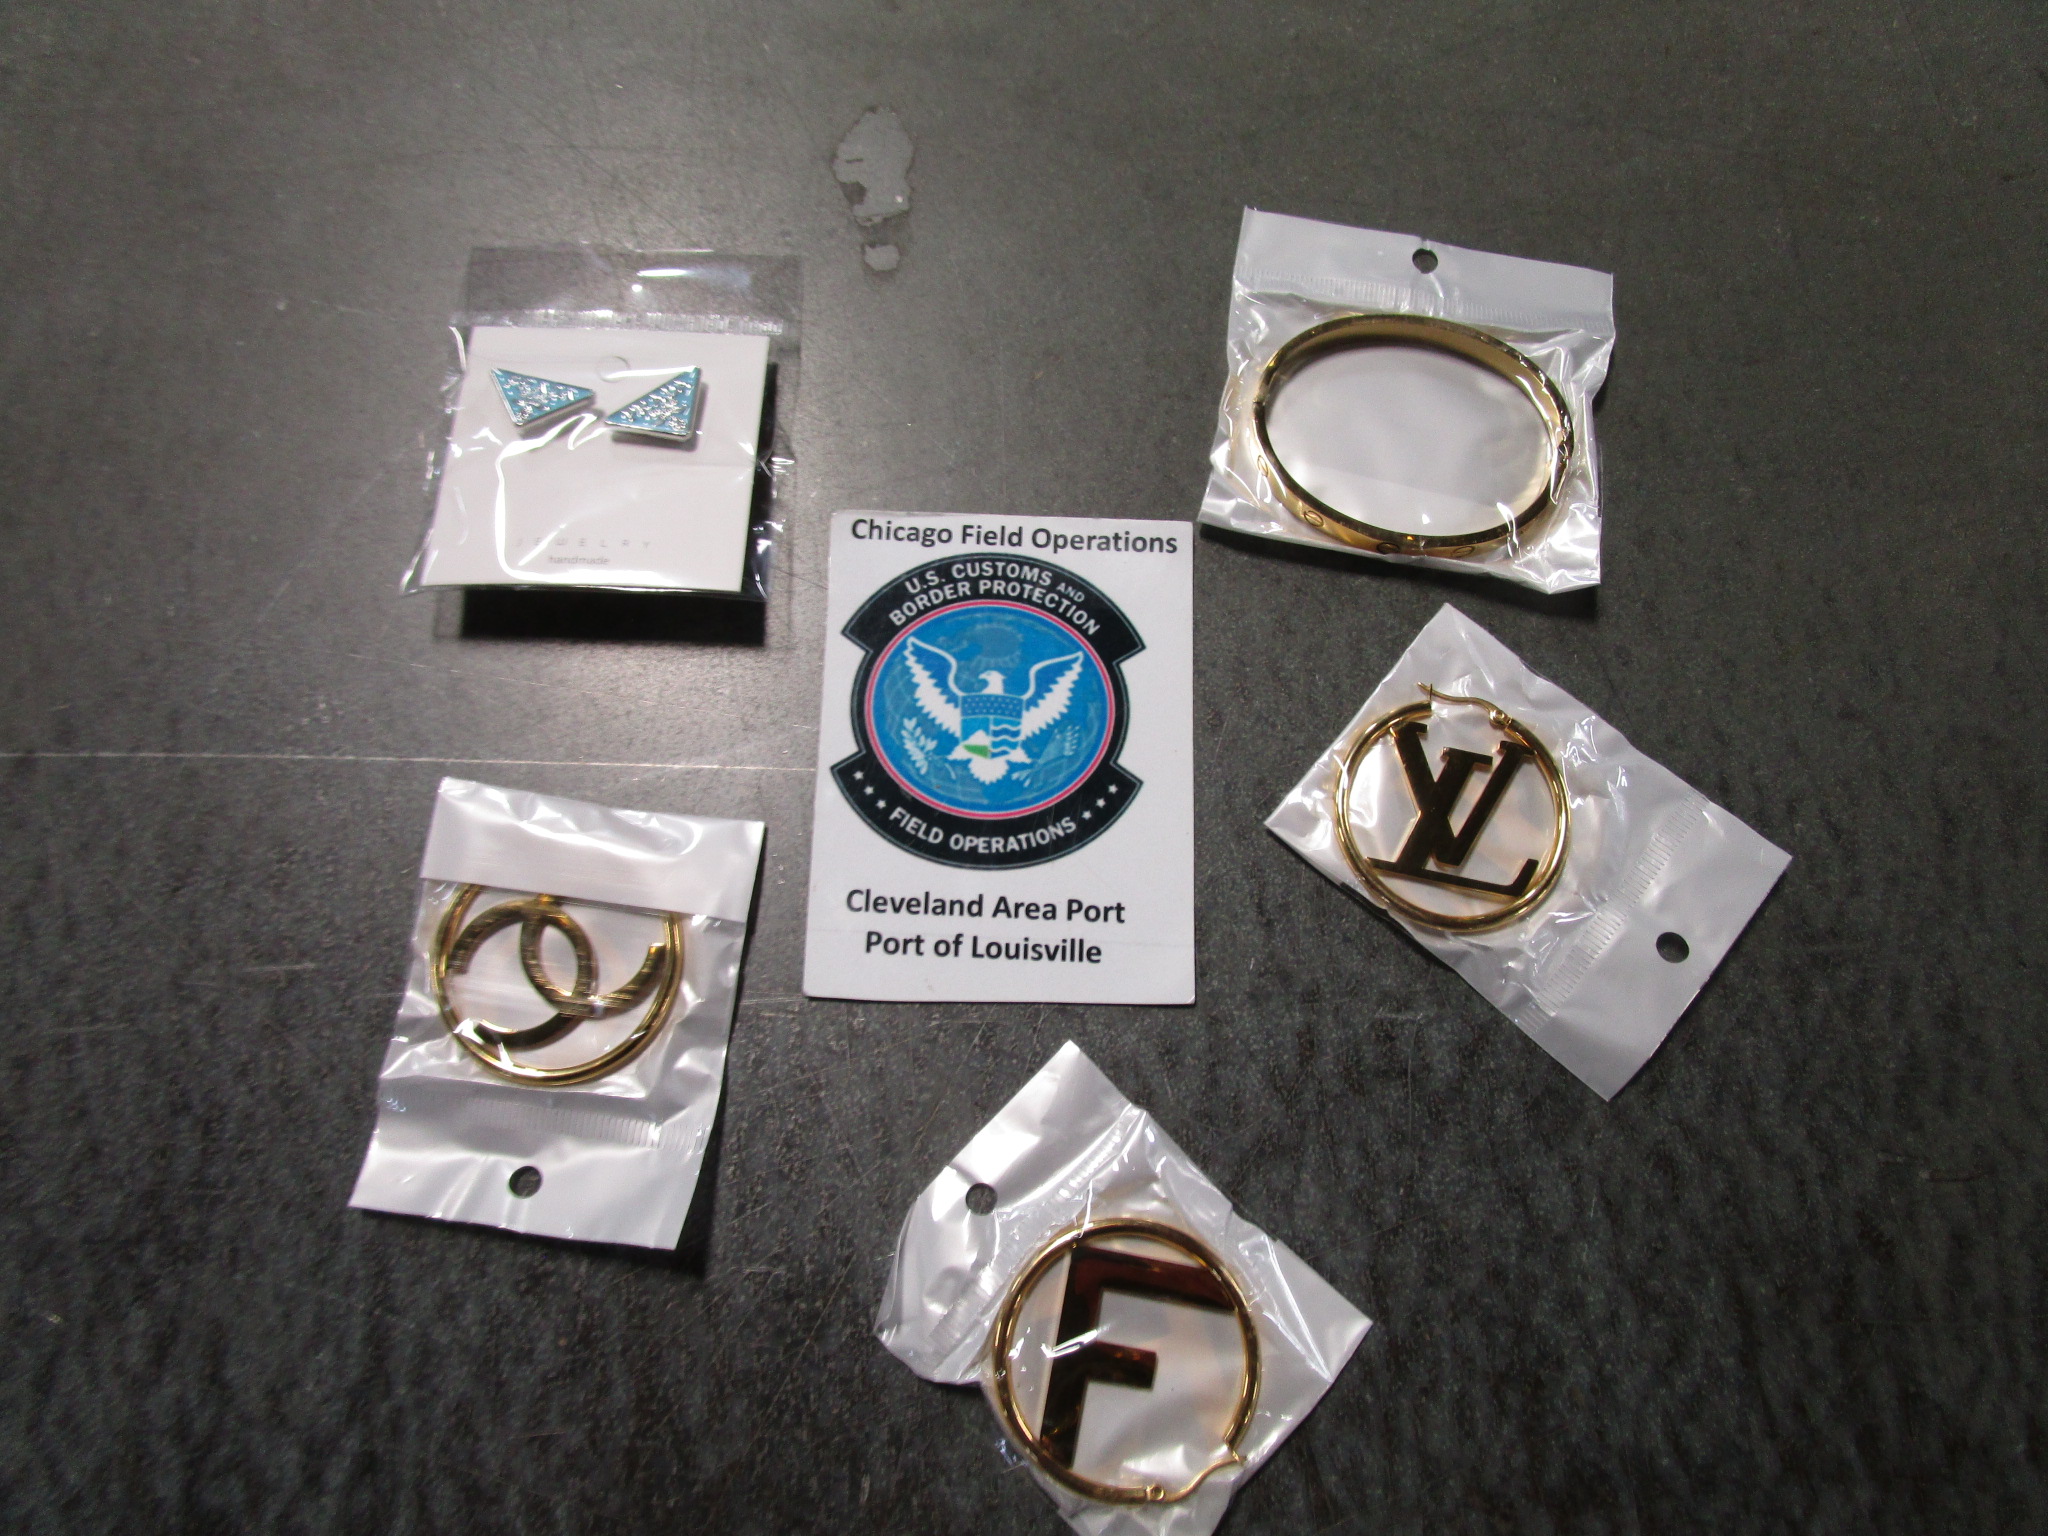 Louisville customs officers seize more than $4.4 million in counterfeit  jewelry